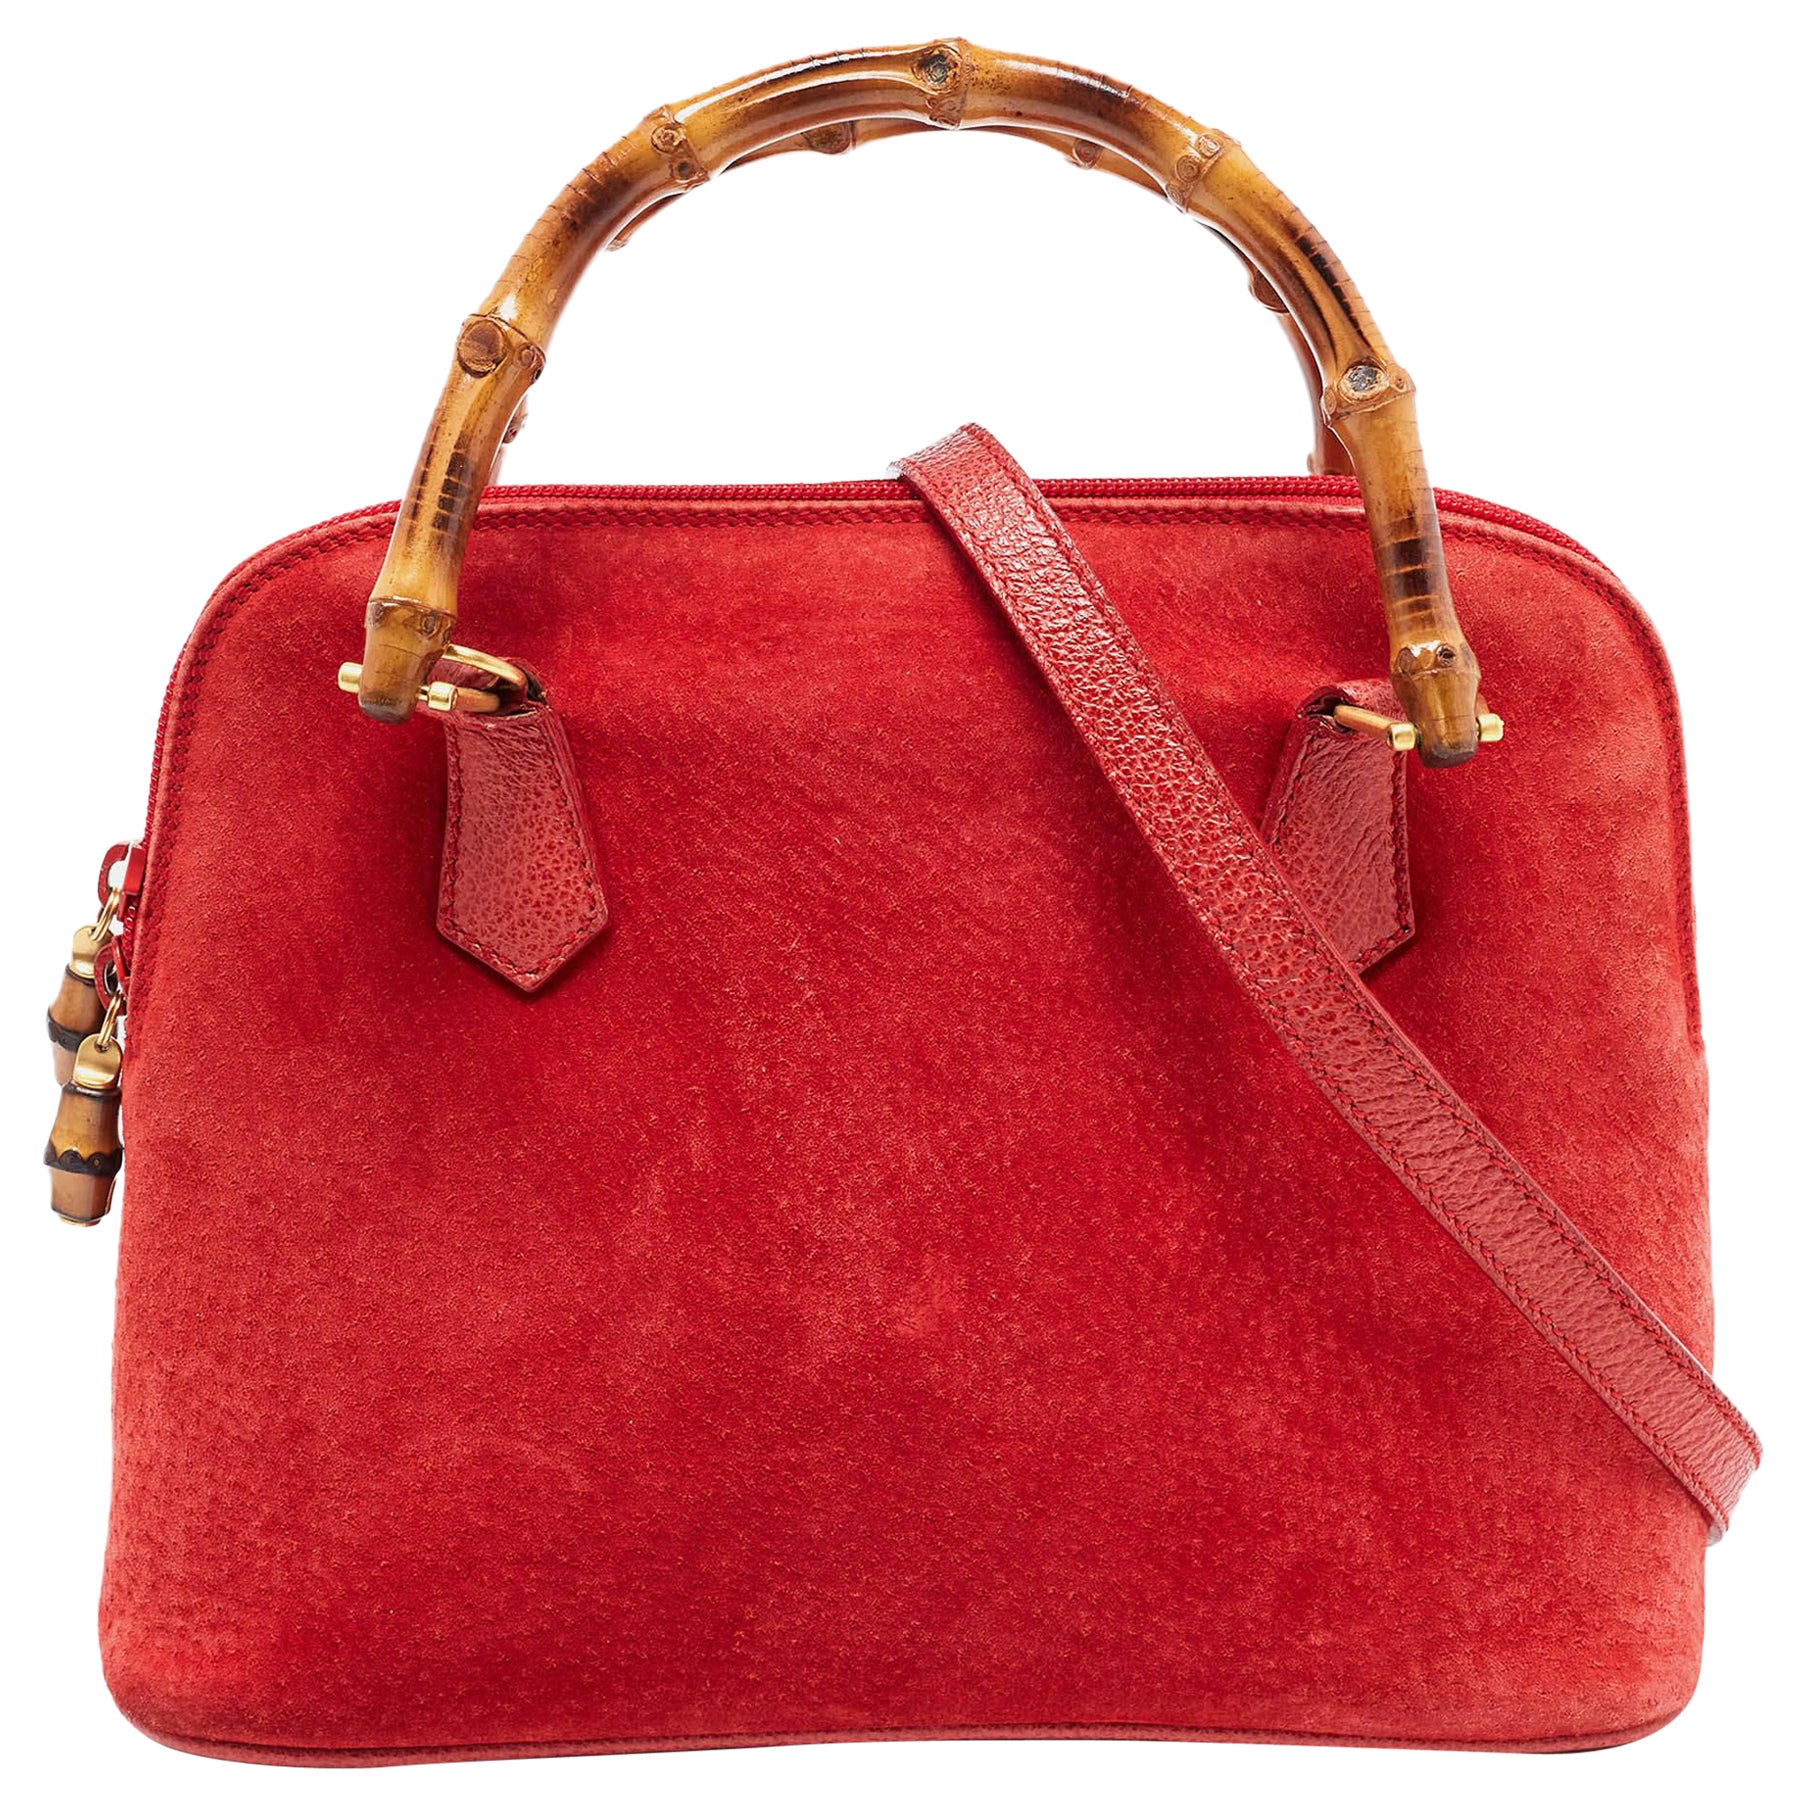 Gucci Red Suede and Leather Bamboo Handle Satchel